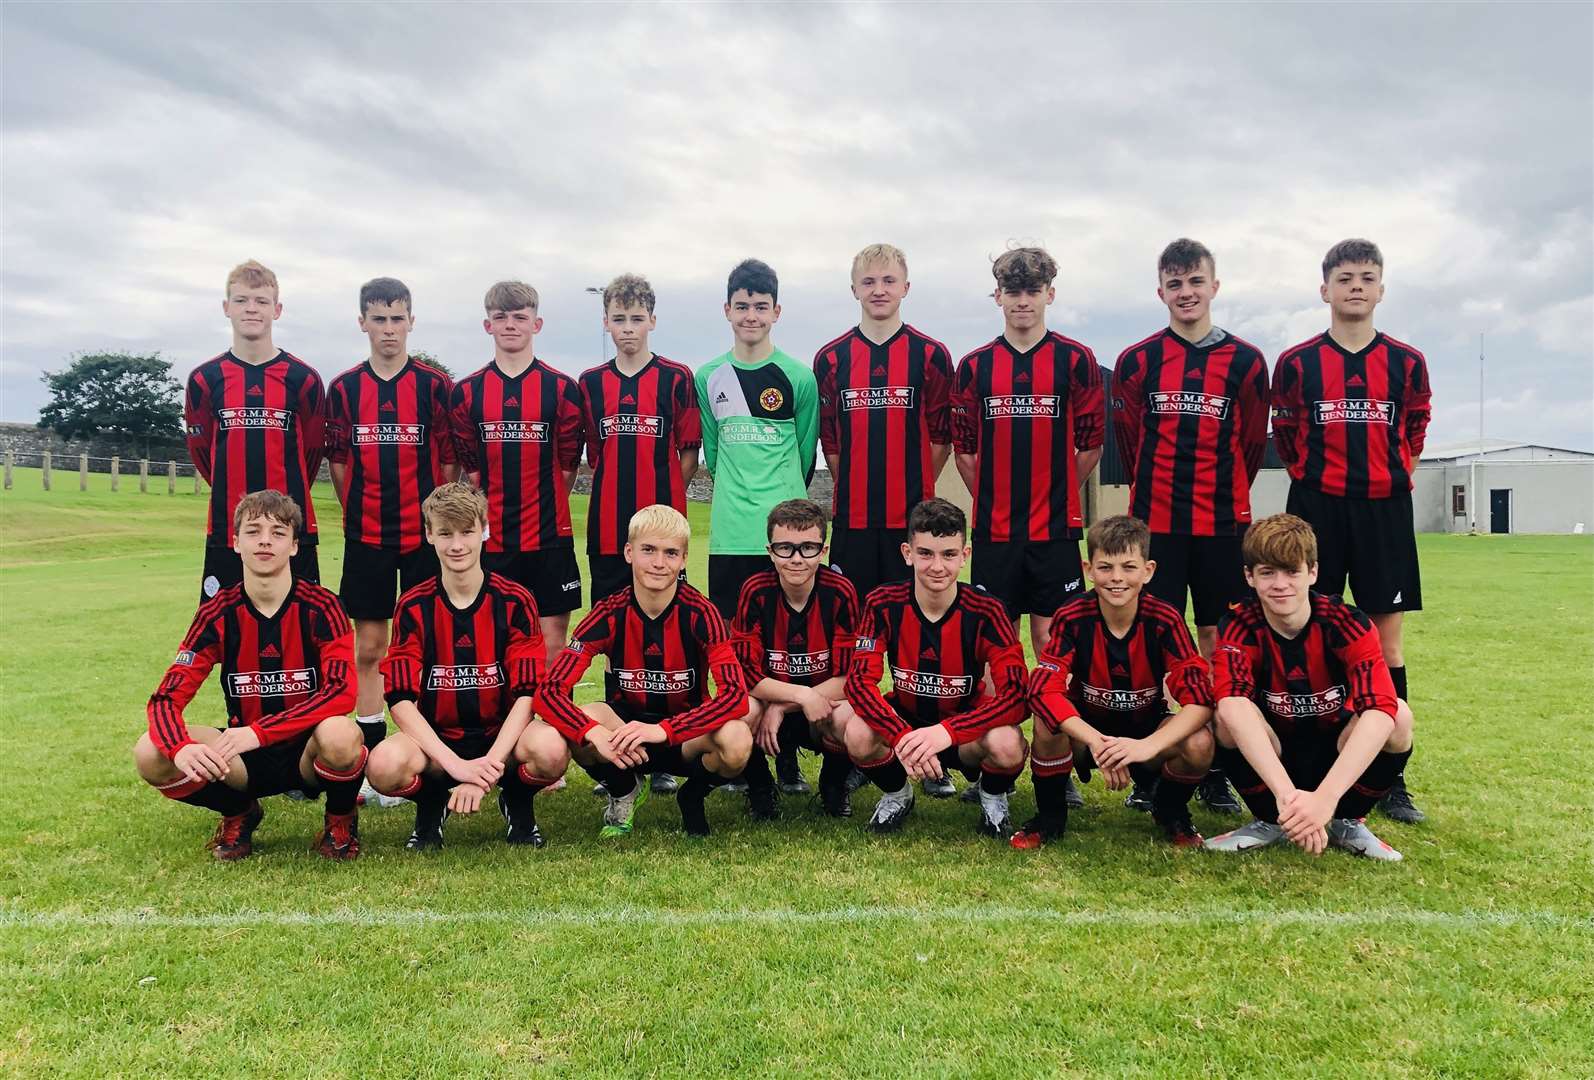 The Caithness United U16 squad who took on their Ross County counterparts at the Upper Bignold Park in Wick.